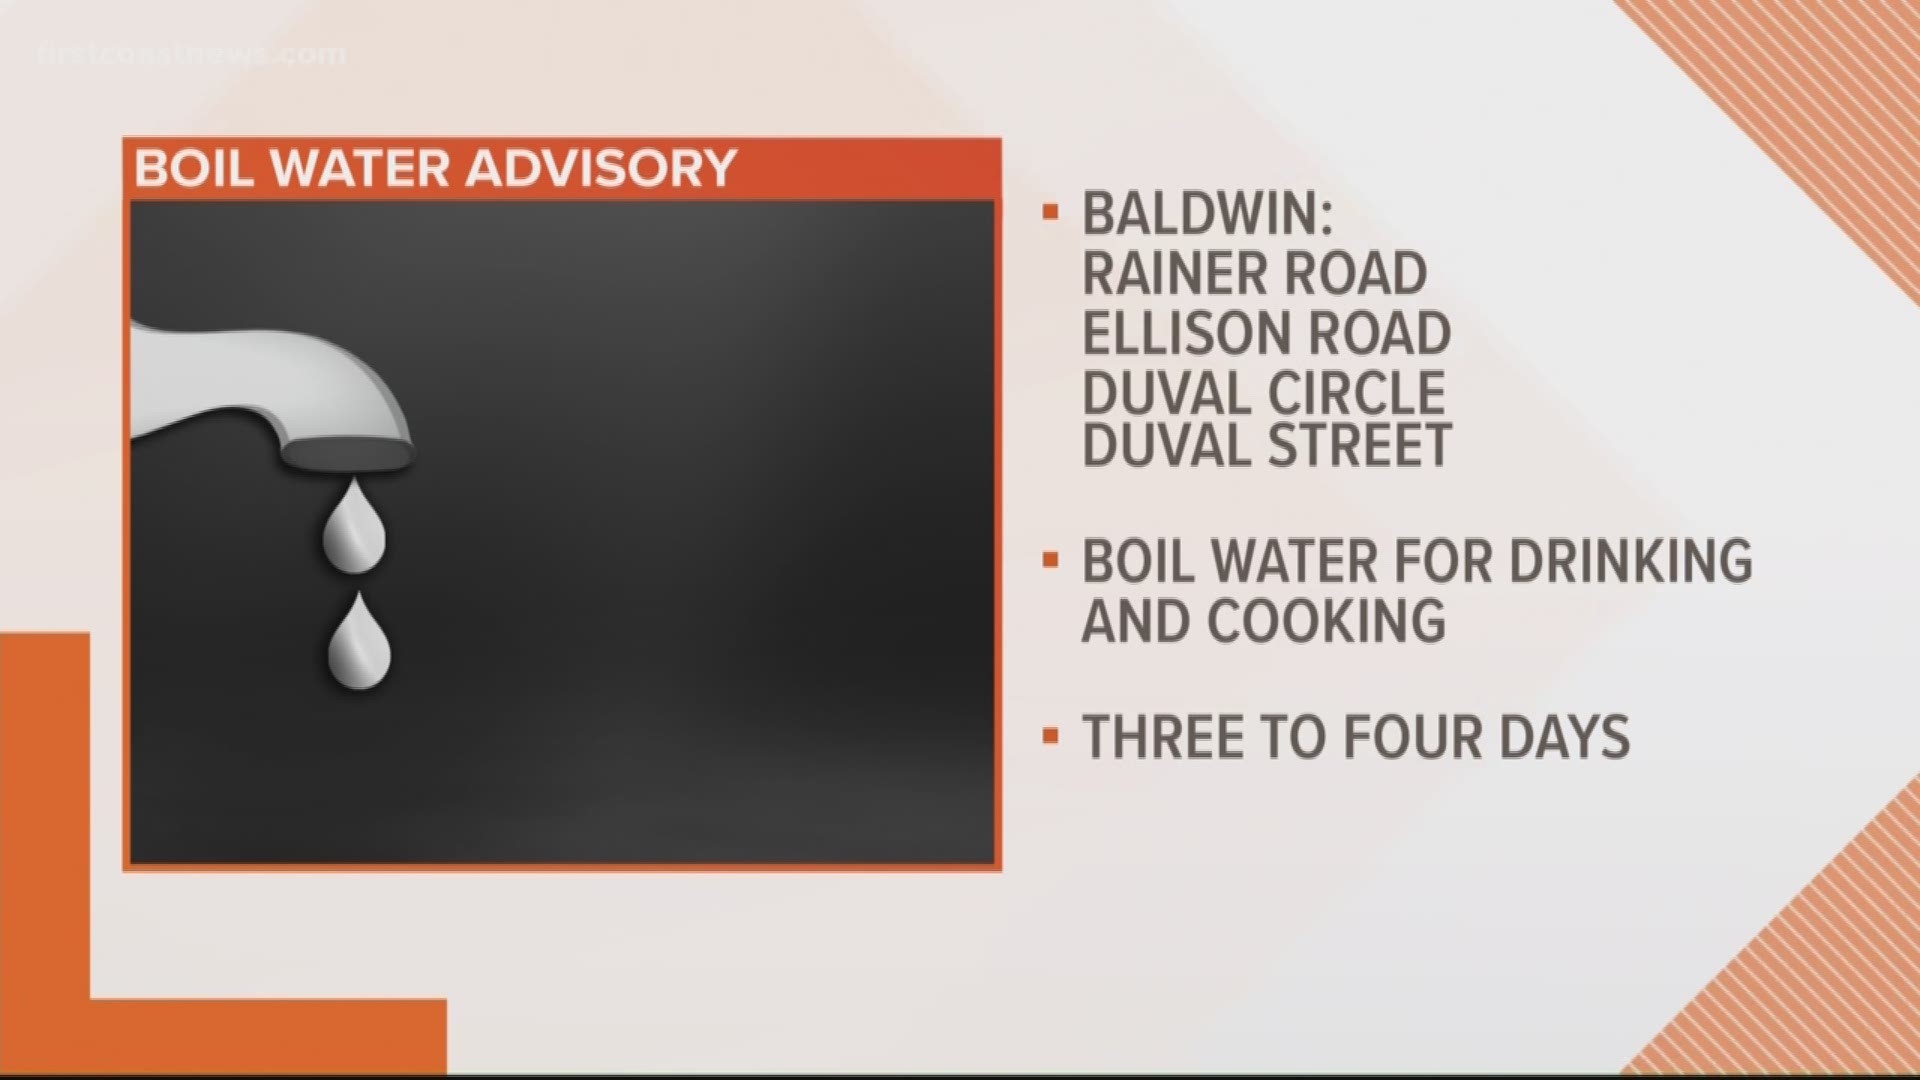 The Town of Baldwin announced the advisory impacted customers who live on Rainer Road, Ellison Road, Duval Circle and Duval Street.